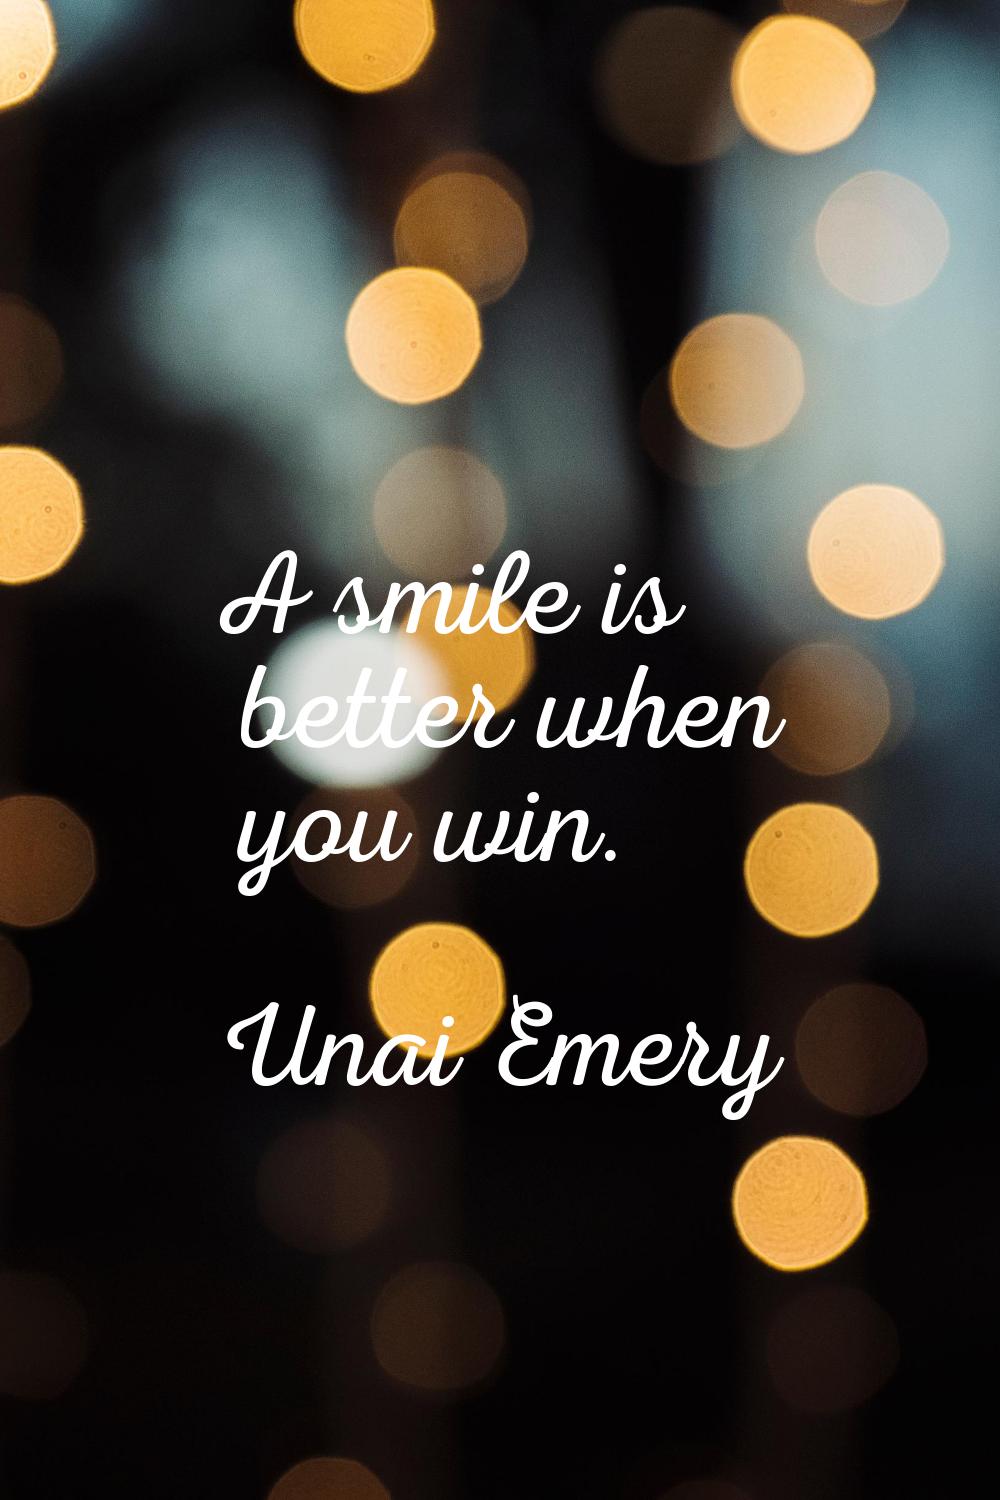 A smile is better when you win.